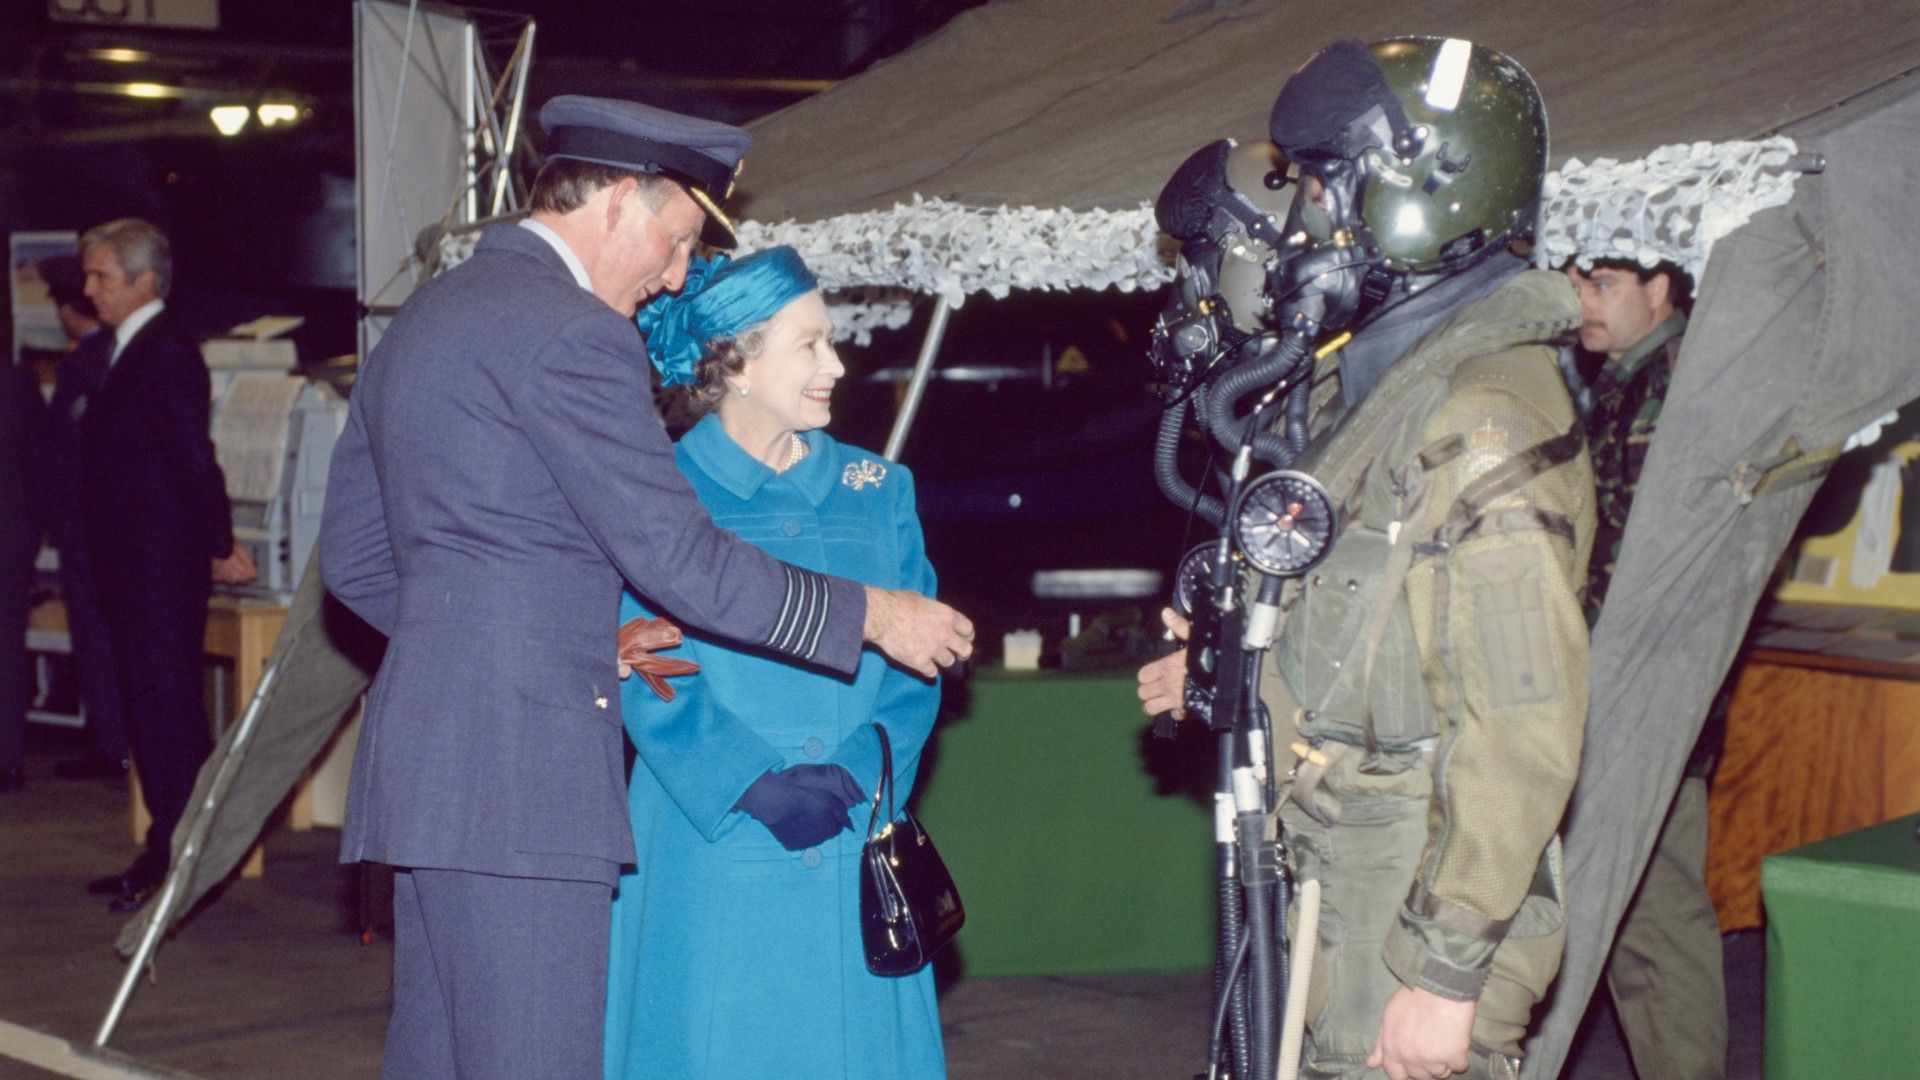 <p>                     The Queen paid a significant visit to Germany in 1990, shortly after the unification of East and West Germany as a result of the tearing down of the Berlin Wall.                   </p>                                      <p>                     The Berlin Wall fell in November 1989, signalling the end of the Cold War and the Soviet Union, which had occupied Germany for years. East and West Germany were officially unified on October 3, 1990, and the Queen visited towards the end of that month, at the tail-end of the political unrest.                   </p>                                      <p>                     While the Queen was largely welcomed in West Germany and had visited that area on previous tours, she met with a slightly more tense reaction when she visited Dresden in former East Germany, which had experienced more of a difficult relationship with the United Kingdom.                   </p>